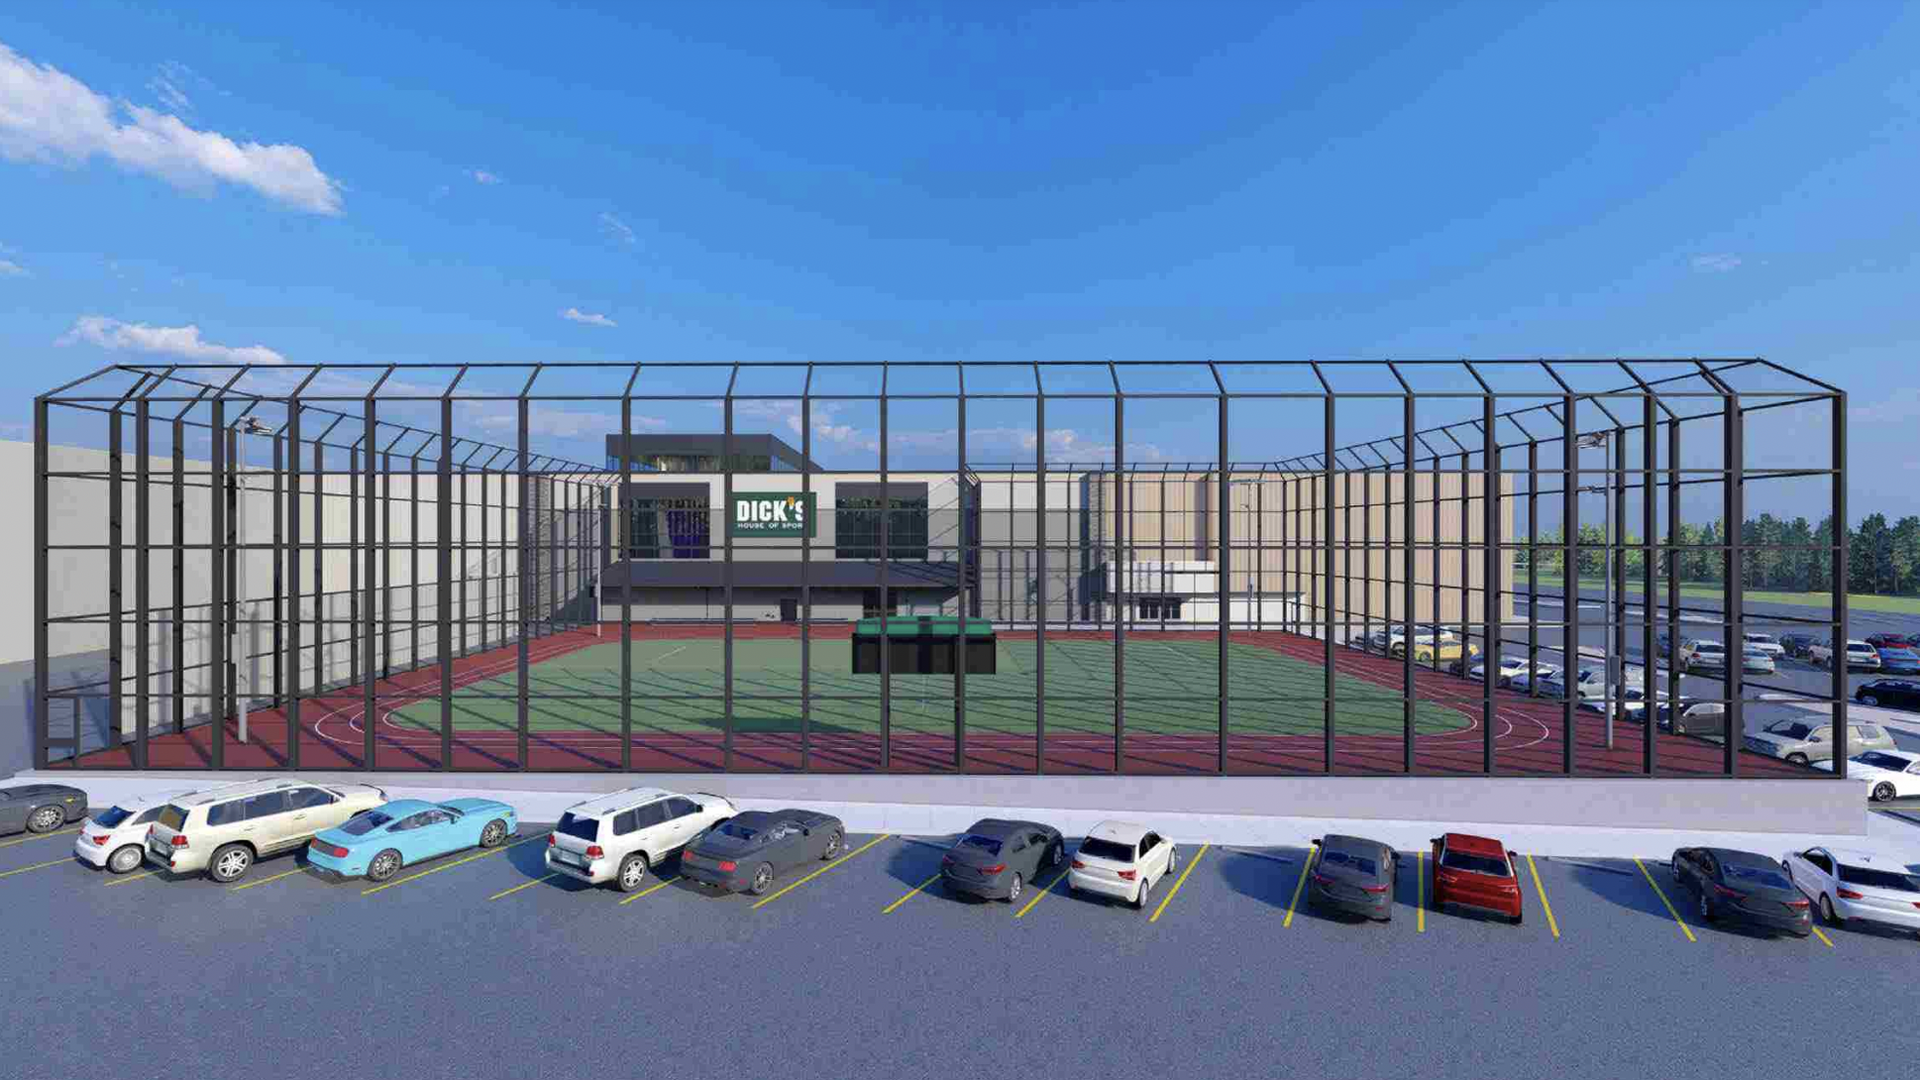 A rendering showing an athletic field surrounded by tall fences in a parking lot 